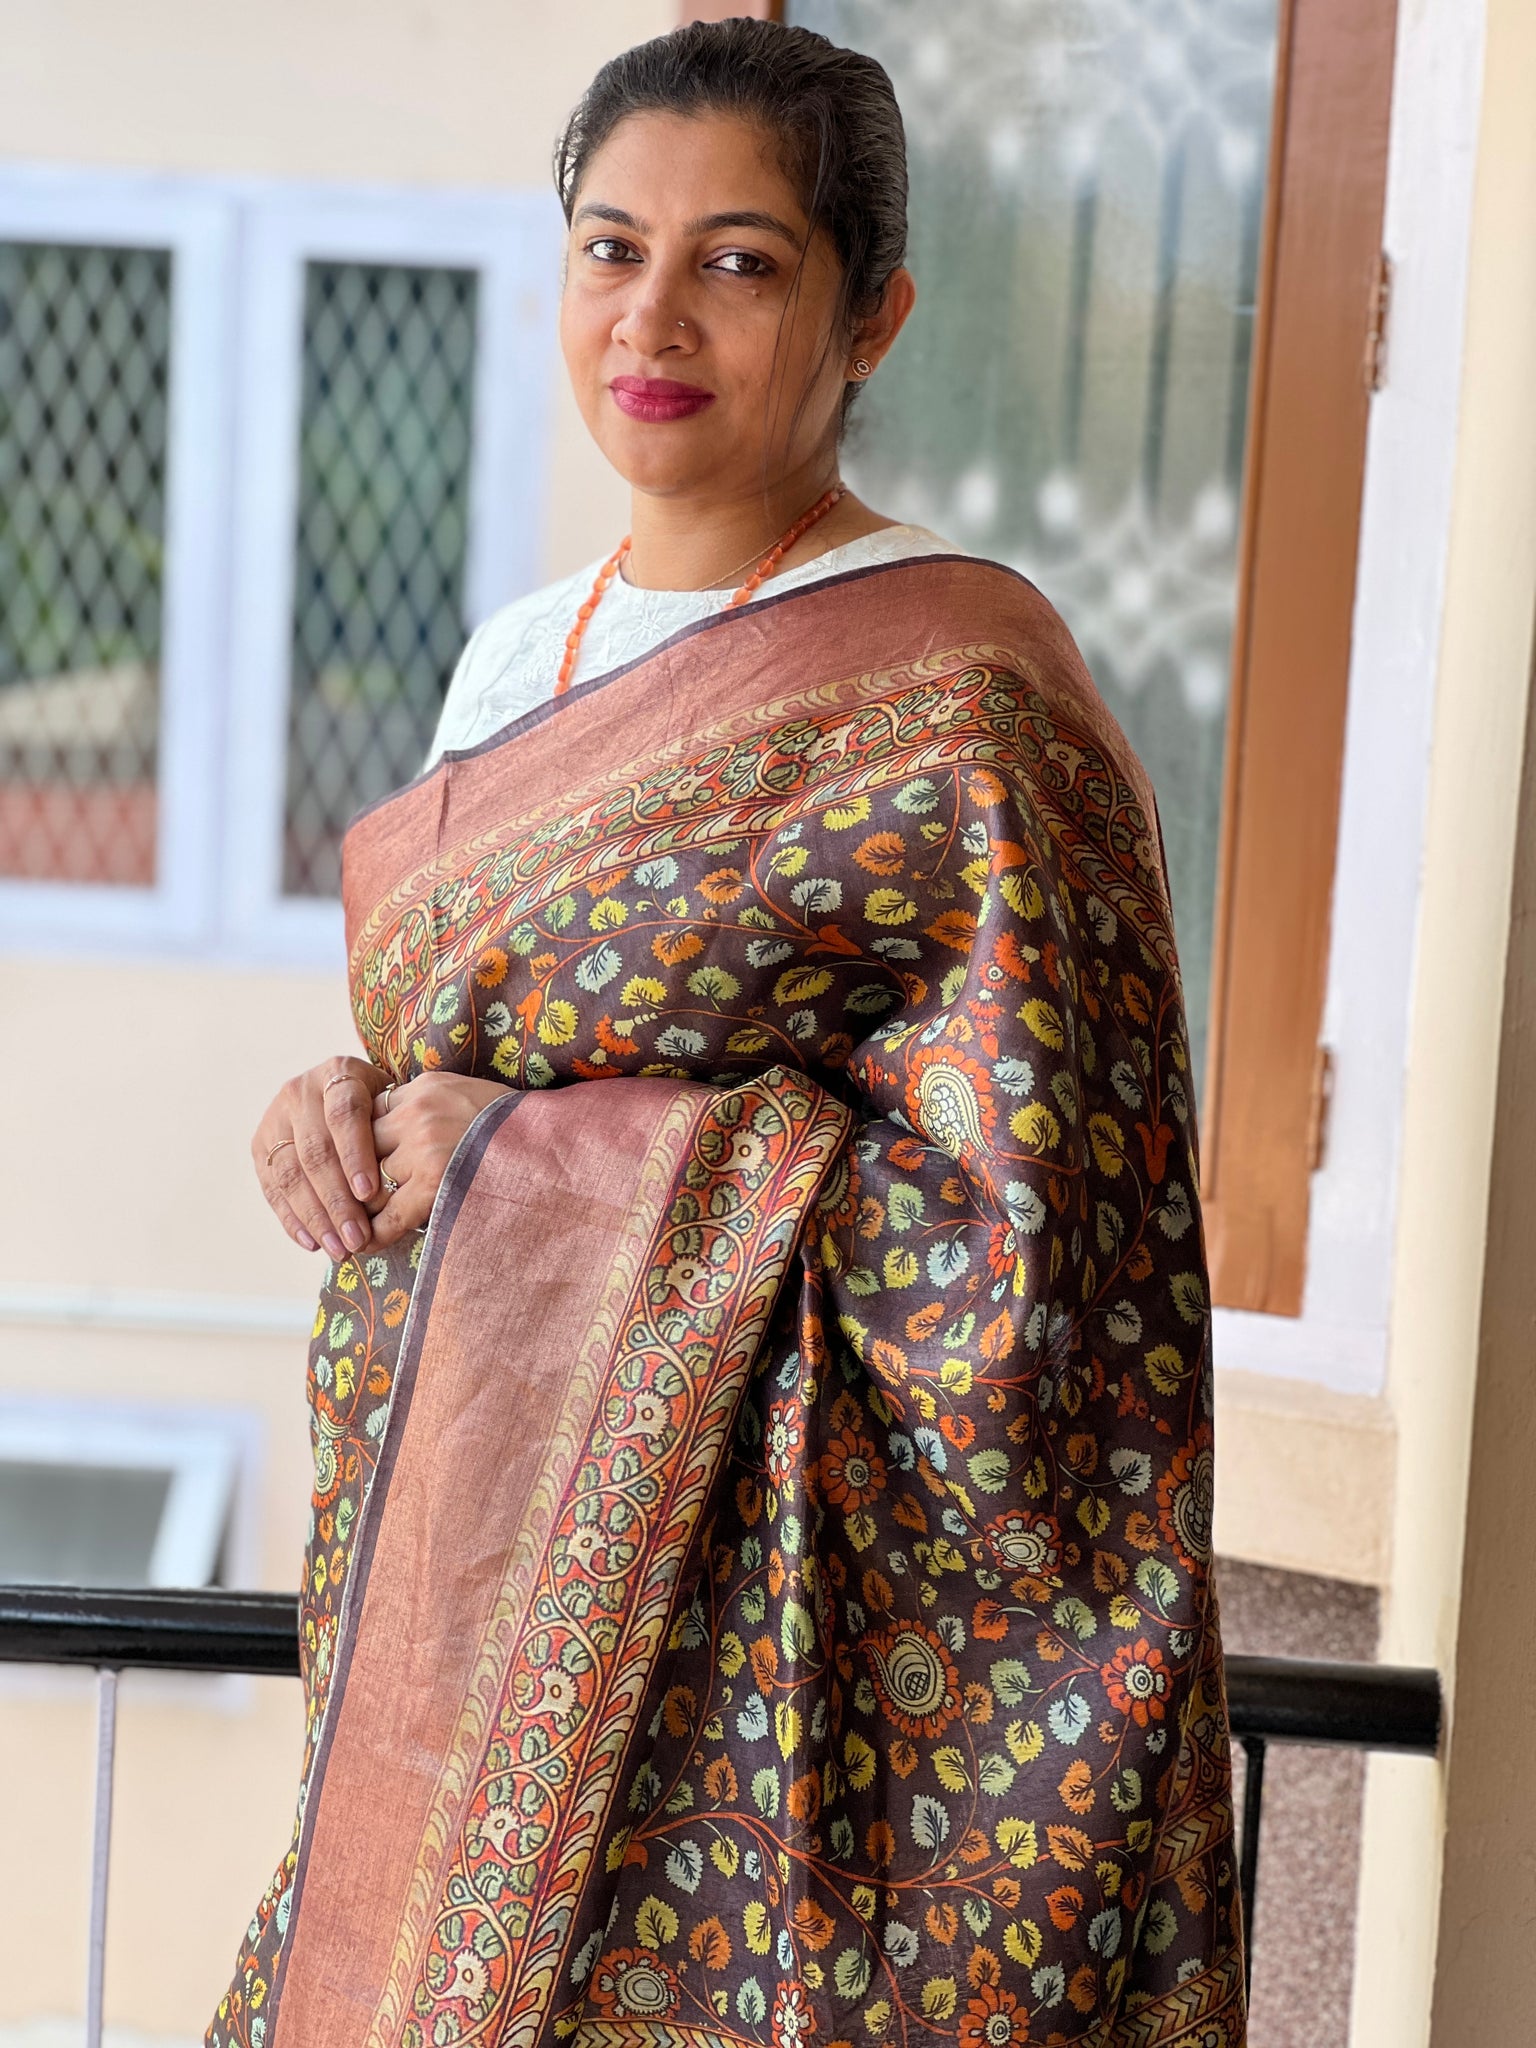 Just A Rumour - by Shweta Raj - Comfy Classy n sassy... Wearing saree with  no petticoat on a dreading summer day especially with your growing tummy  can be such a liberating